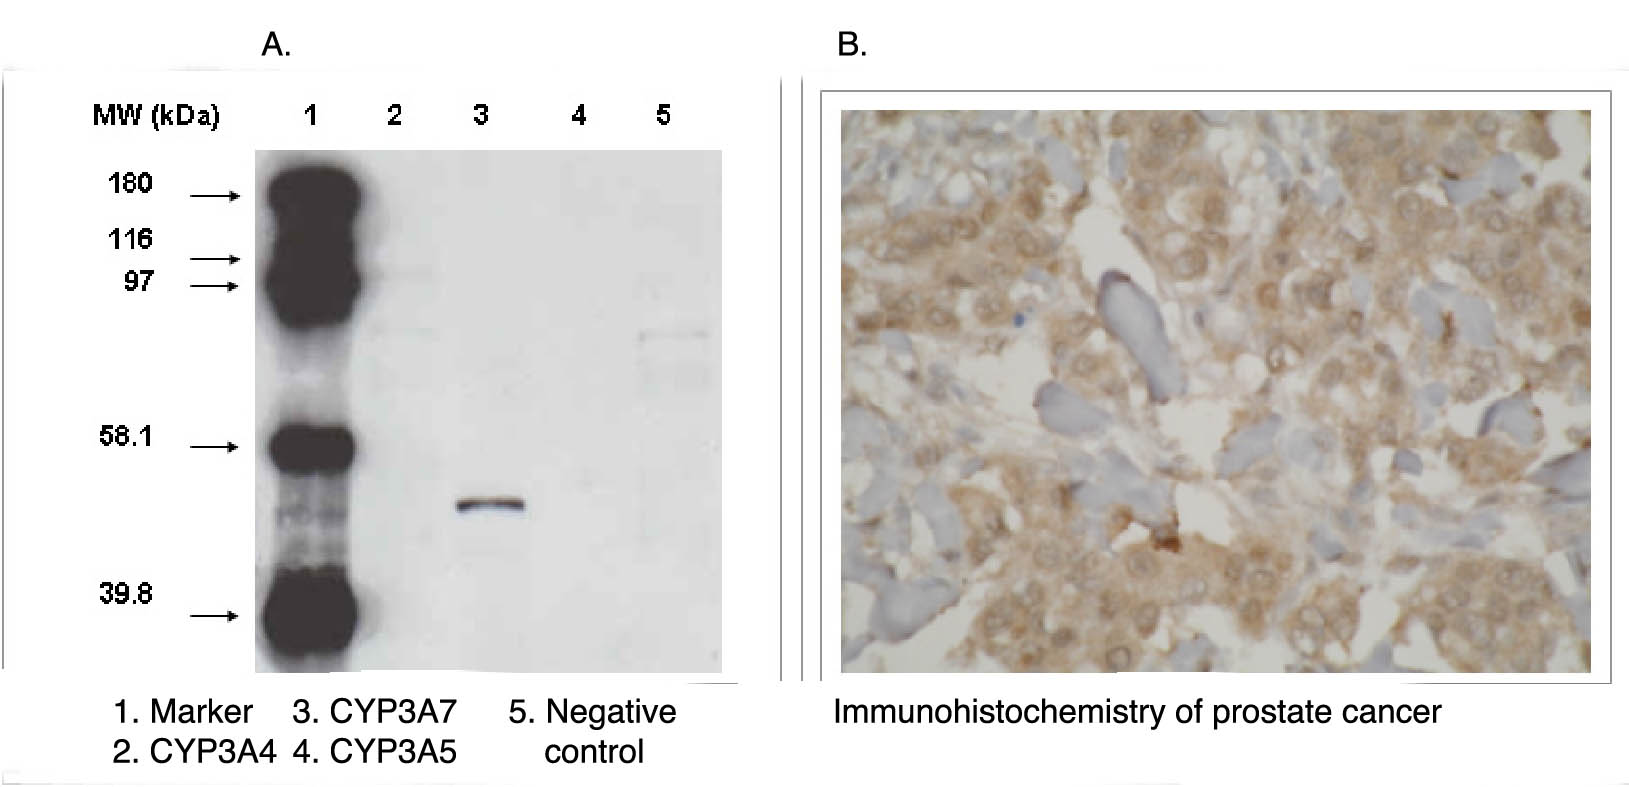 "
A. Western blot analysis using CYP3A7 antibody (cat. no. X2048M) on various recombinant CYP450 proteins.
B. Immunohistochemistry staining of prostate cancer tissue using CYP3A7 antibody."